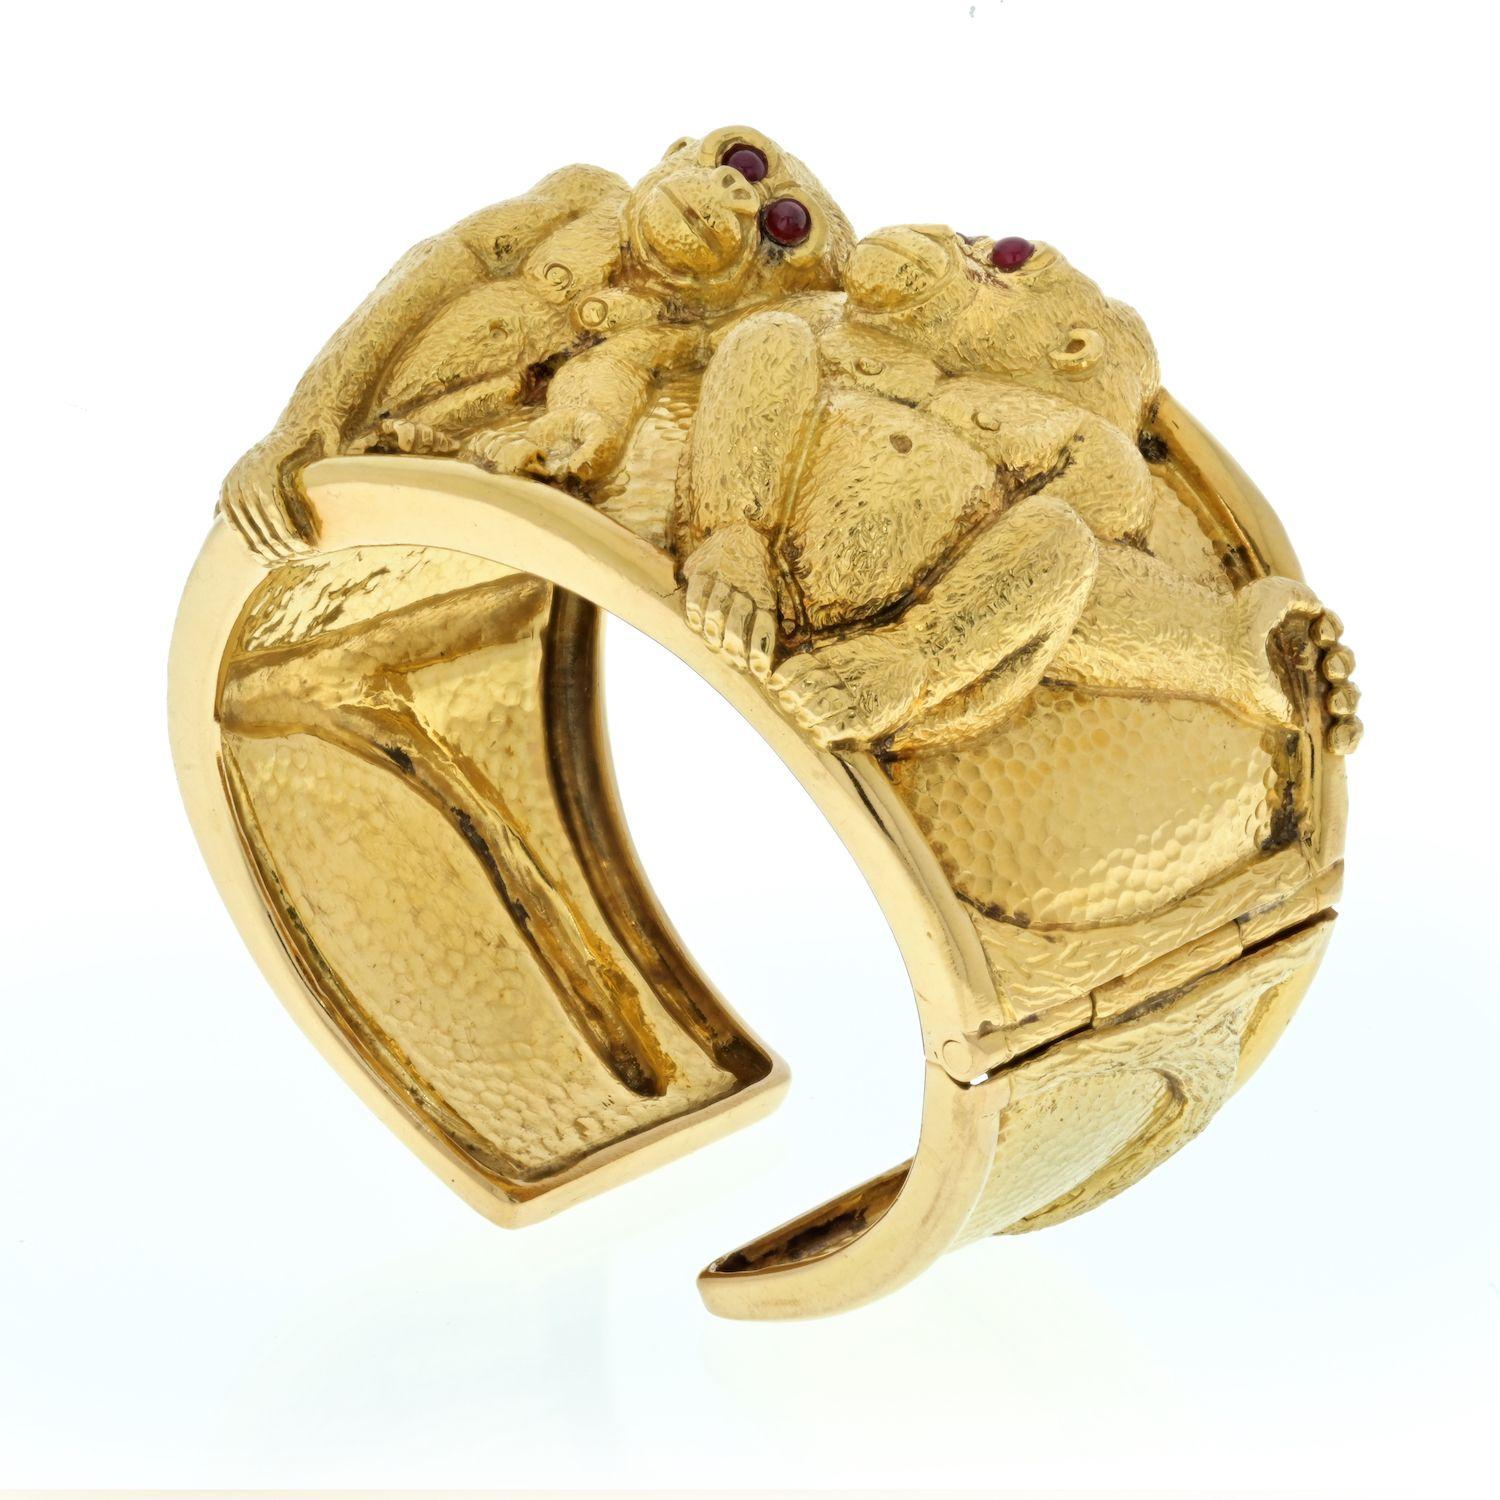 A staple piece of jewelry from David Webb is the 18K Yellow Gold Double Monkey Cuff. 
Two gorillas sit facing each other in a friendly pose, their eyes are set with cabochon rubies. 
The bracelet is a solid 18k gold cuff and will fit approx. 6.5 to